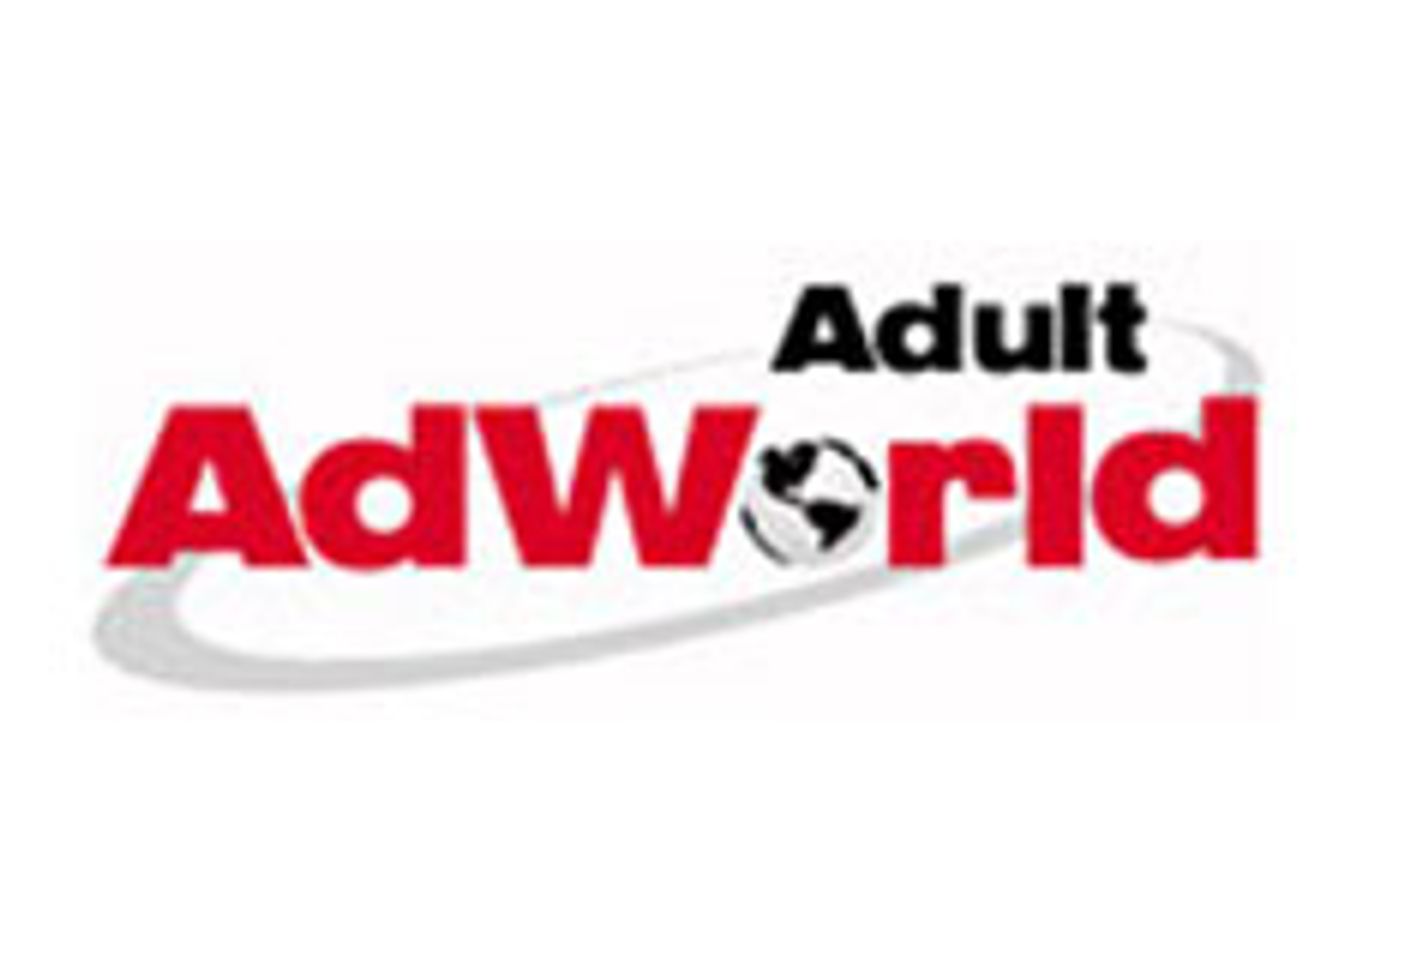 Adult AdWorld Launches Mobile Ad Program for Publishers